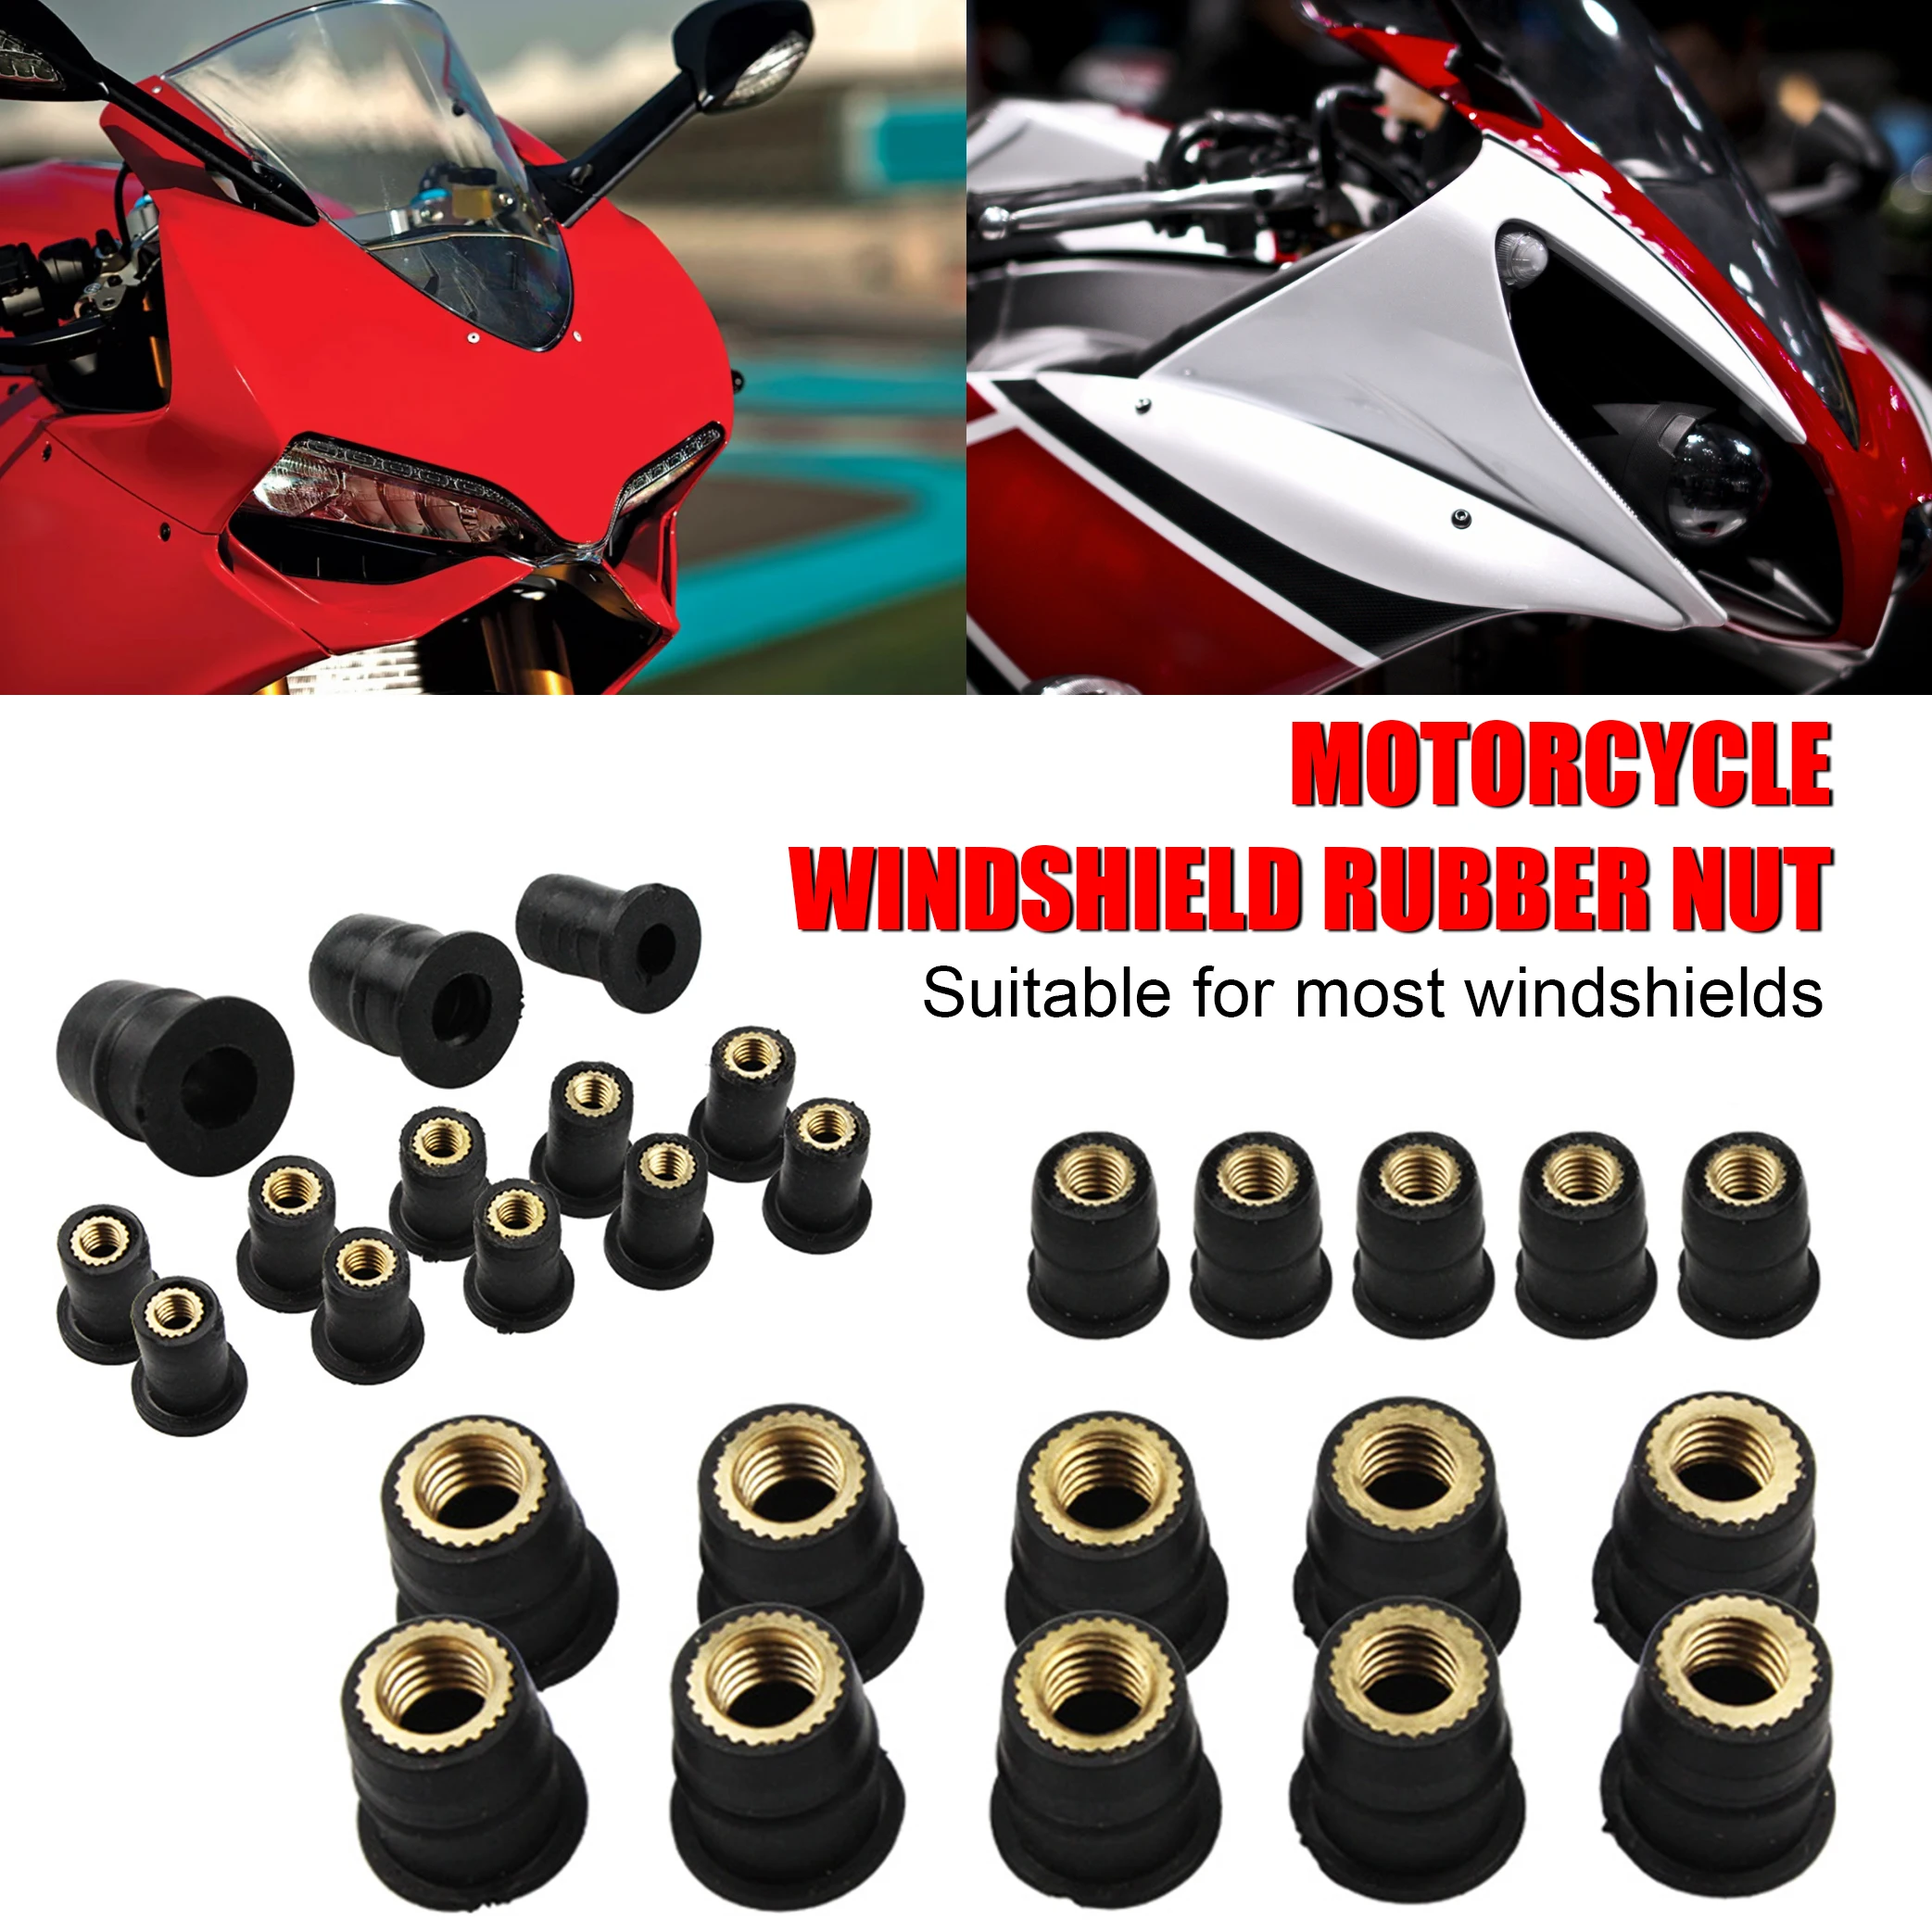 

New 10Pcs Motorcycle Windshield Nuts M4 M5 M6 Rubber Windshield Fairing Bolt Nut Fastener Universal Motorcycle Accessories